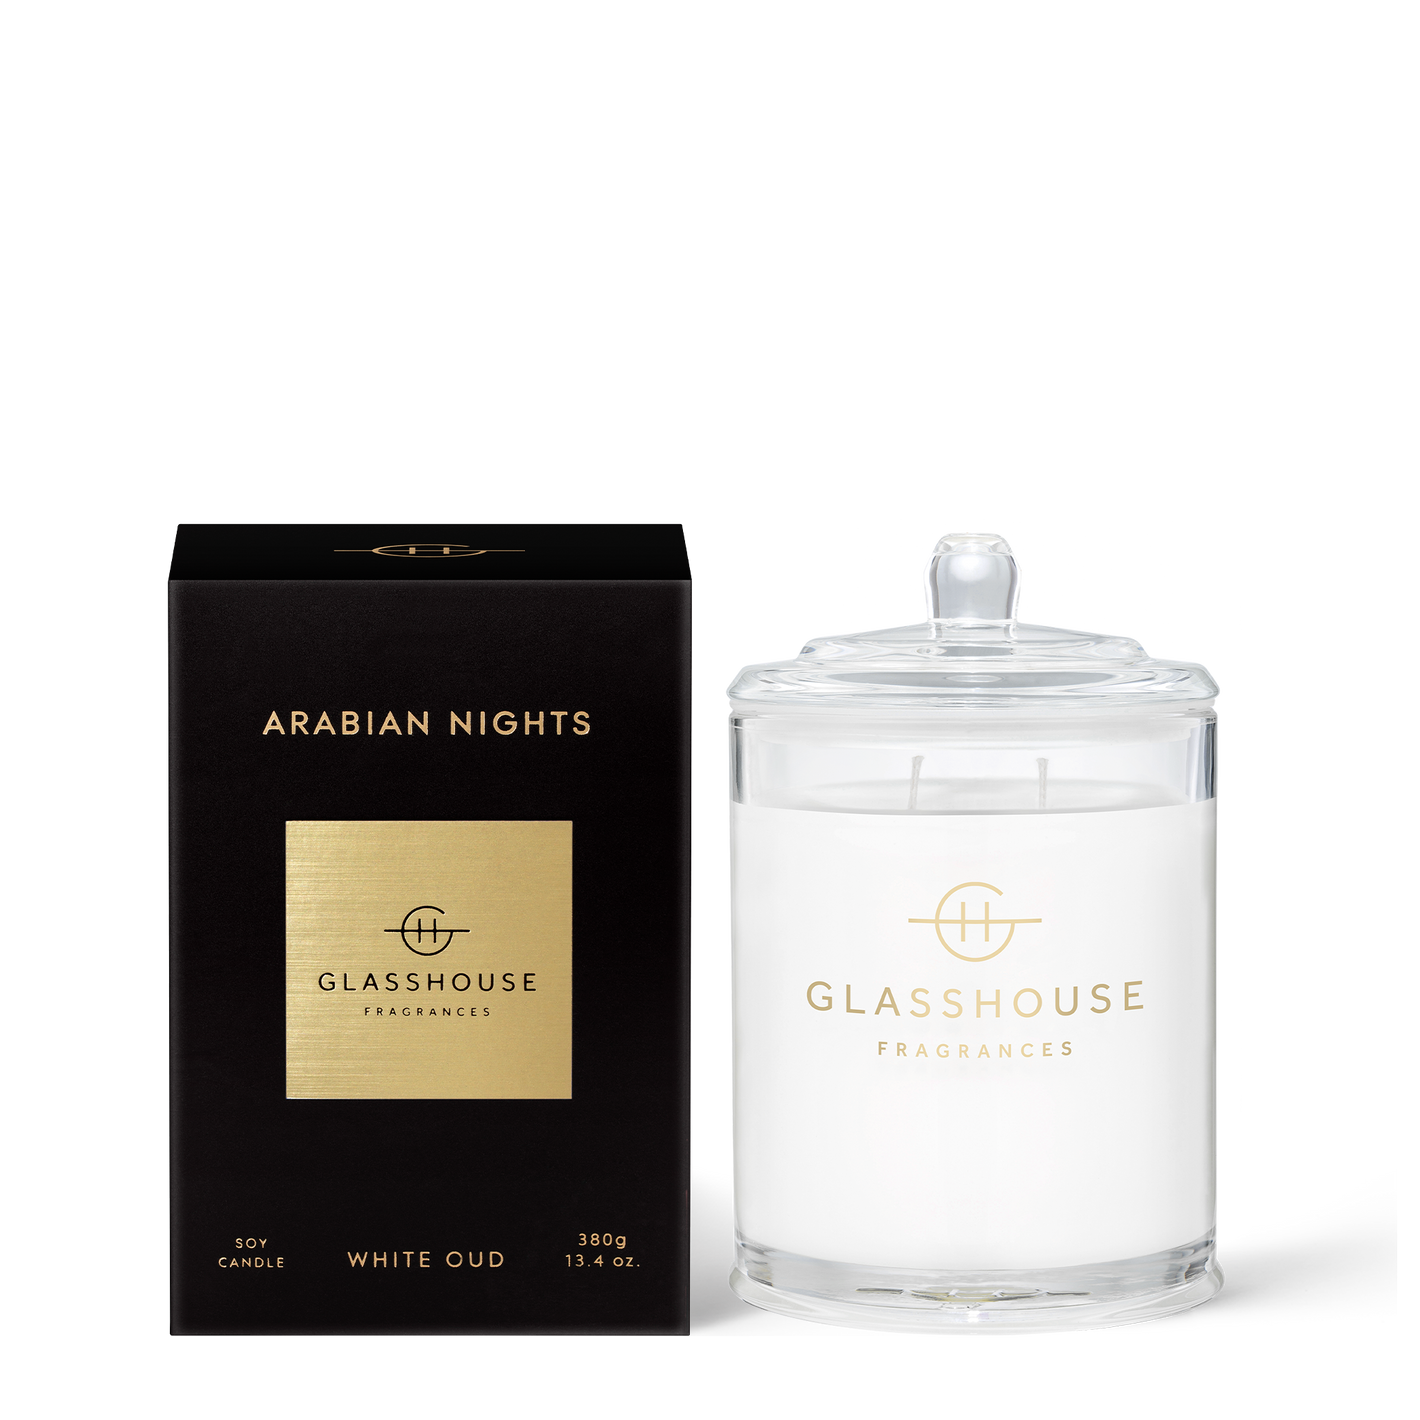 Glasshouse Fragrances ARABIAN NIGHTS 380g Triple Scented Soy Candle